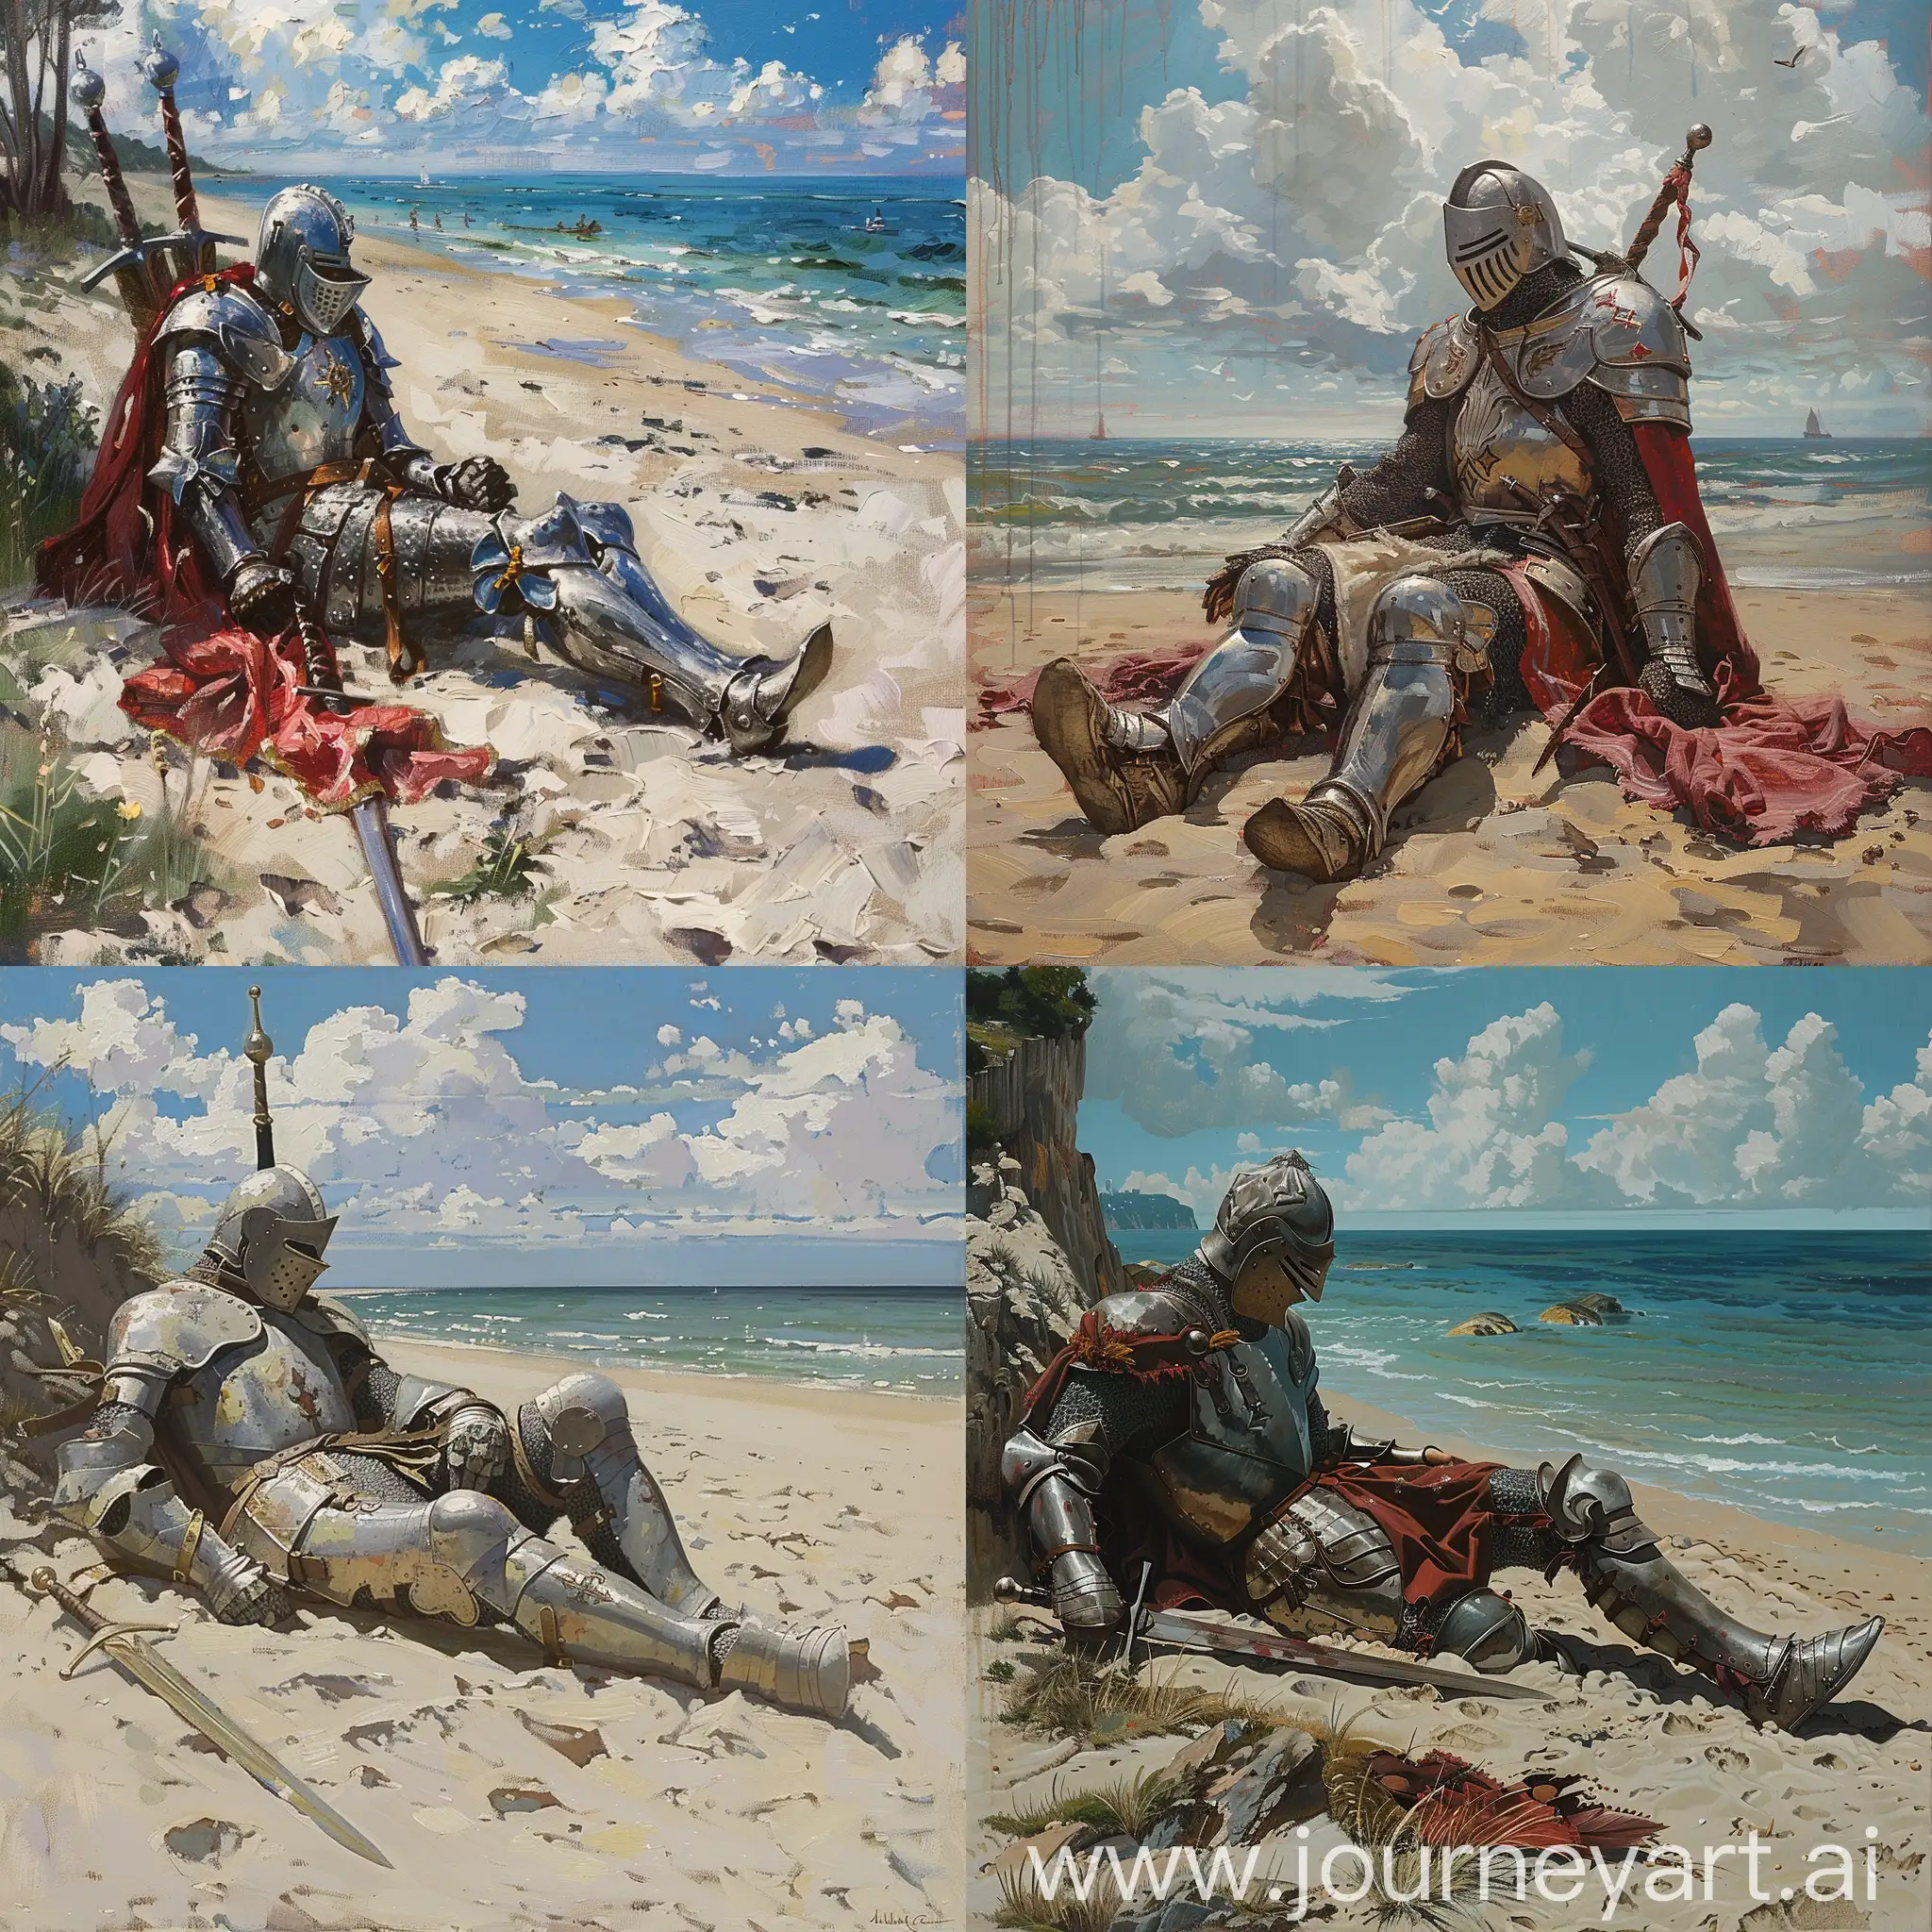 painting of a knight resting on the beach
